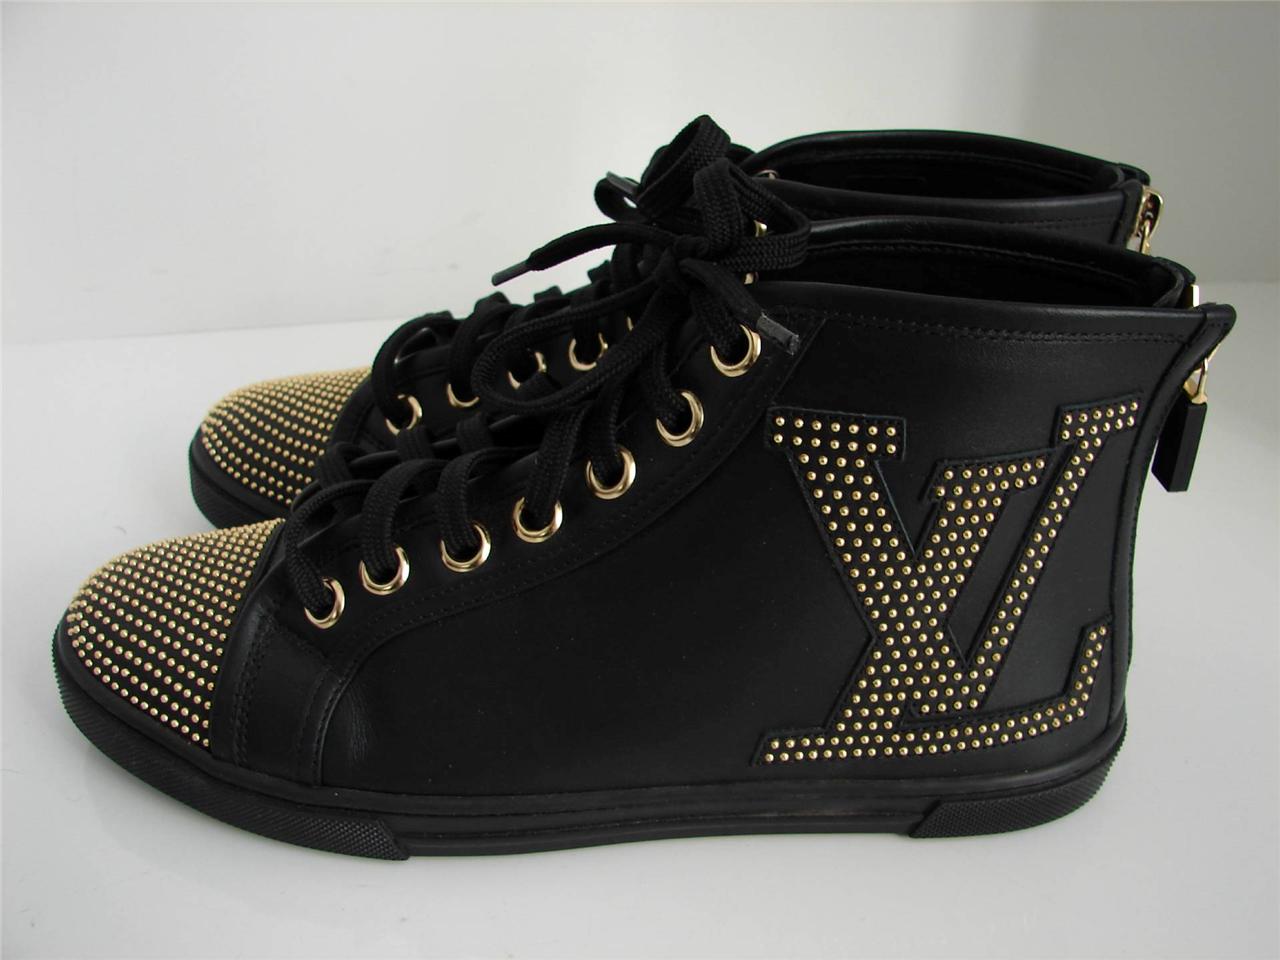 Louis Vuitton Studded Leather High Top Sneakers/Shoe Sz 37 MUST SEE! | eBay